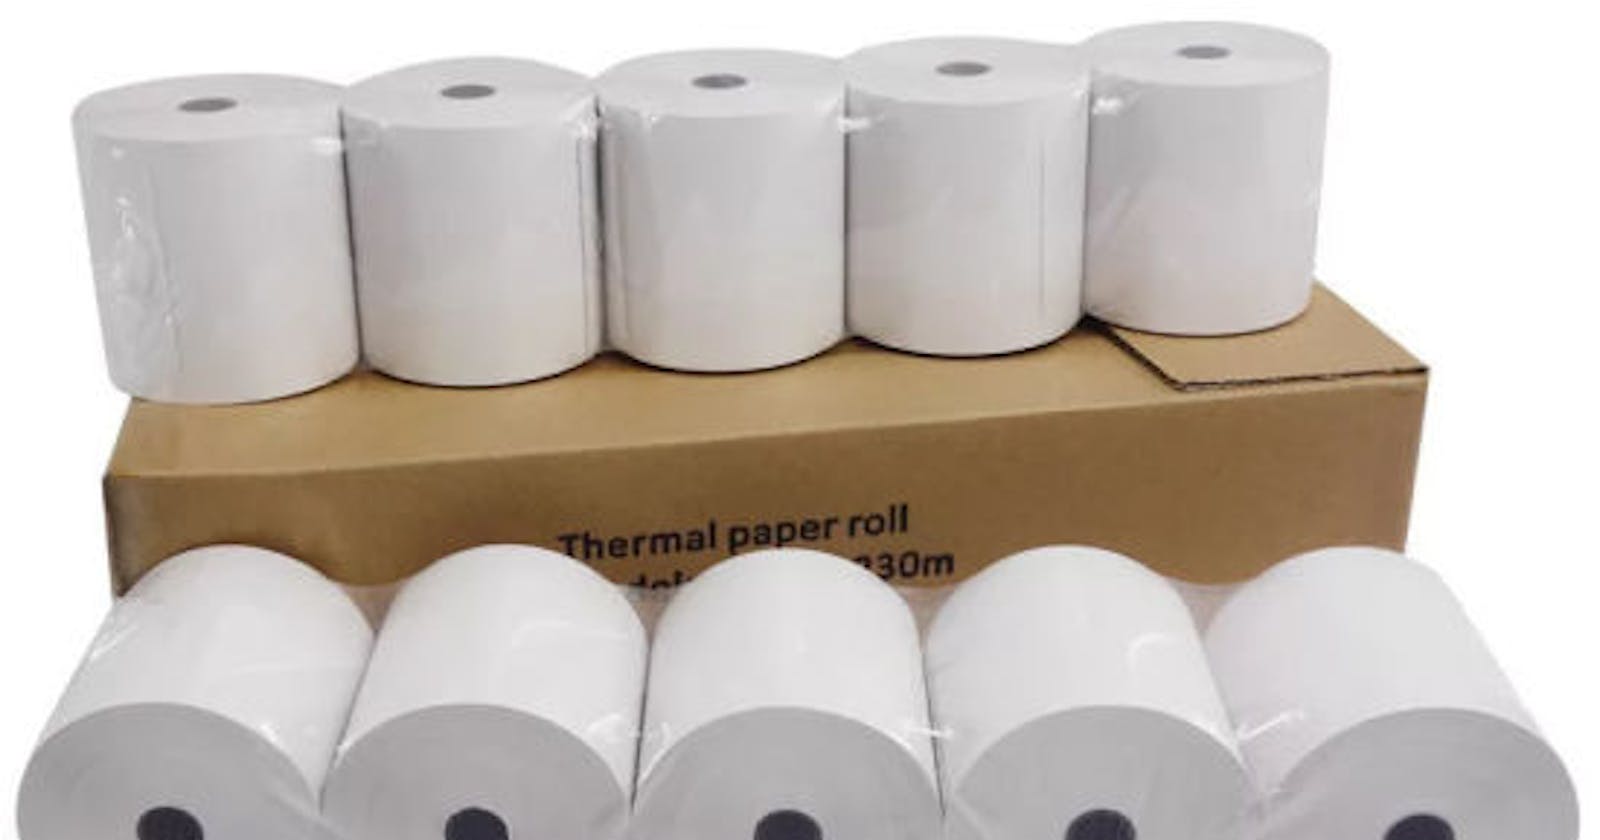 Thermal Paper Market Report 2021-26: Demand, Trends, Outlook, Growth And Forecast